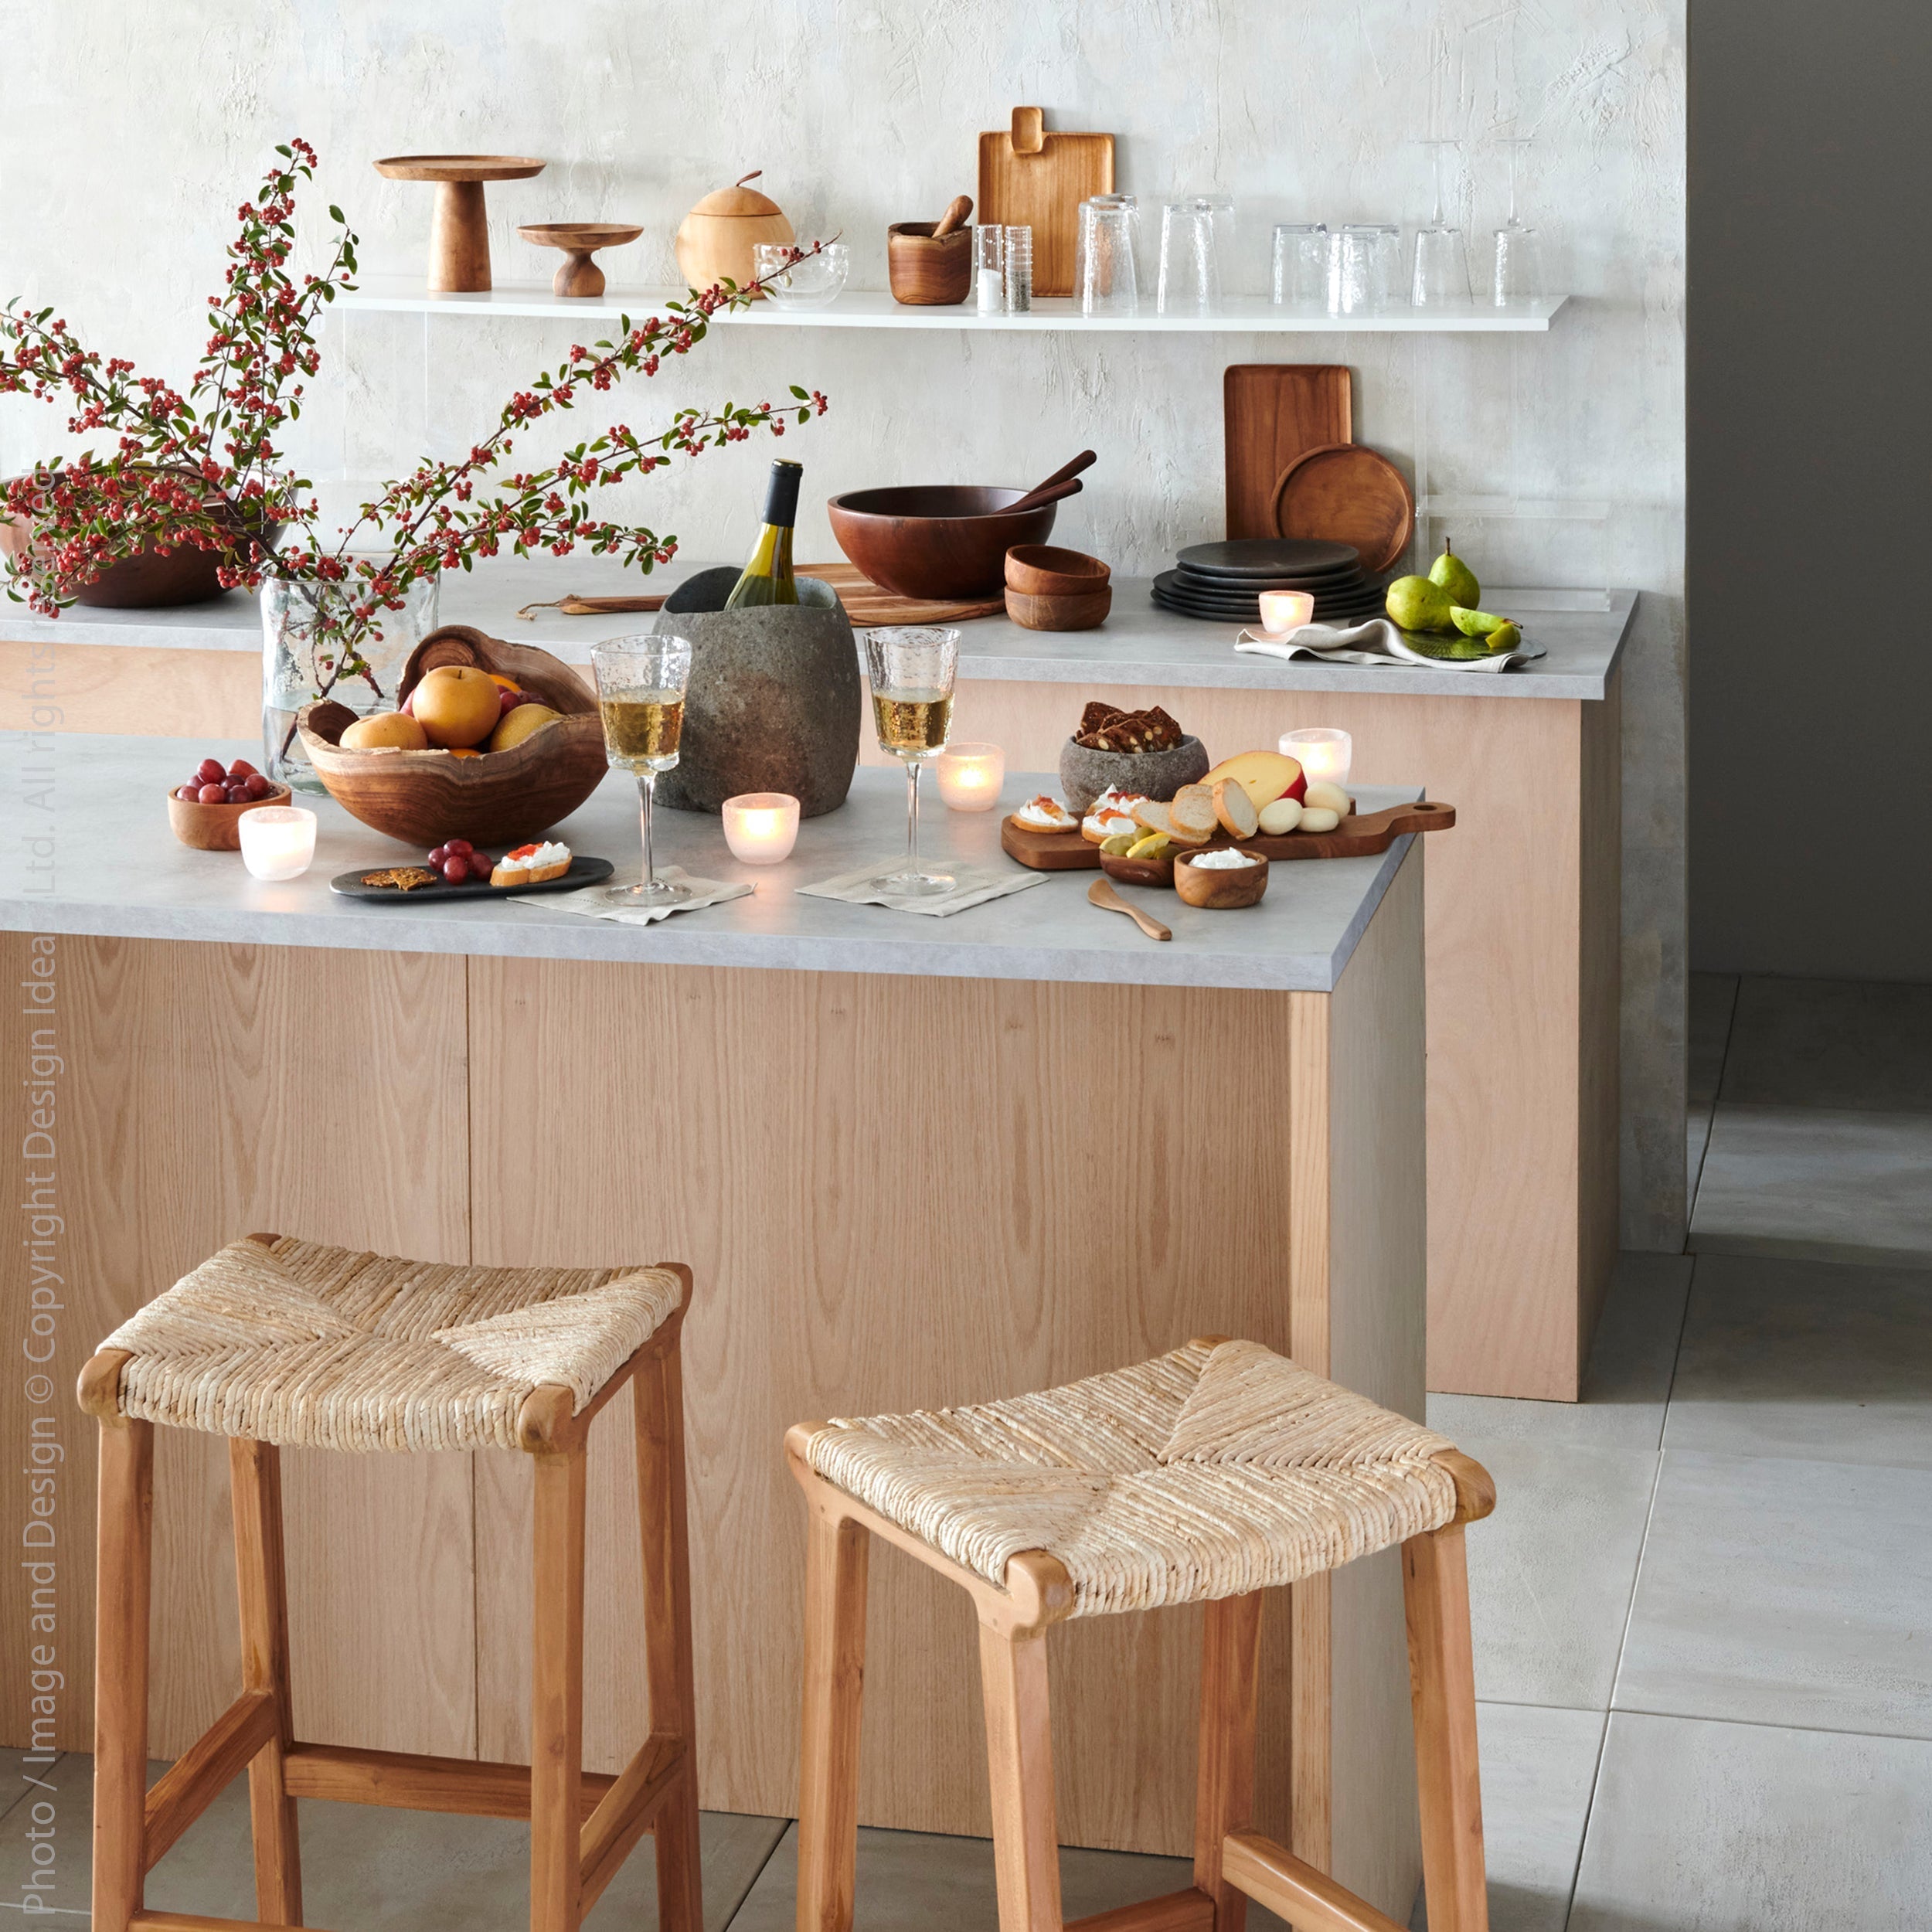 Visby Banana Tree Bark Bar Stool Sand Color | Image 2 | From the Visby Collection | Skillfully assembled with natural banana tree bark for long lasting use | Available in natural color | texxture home